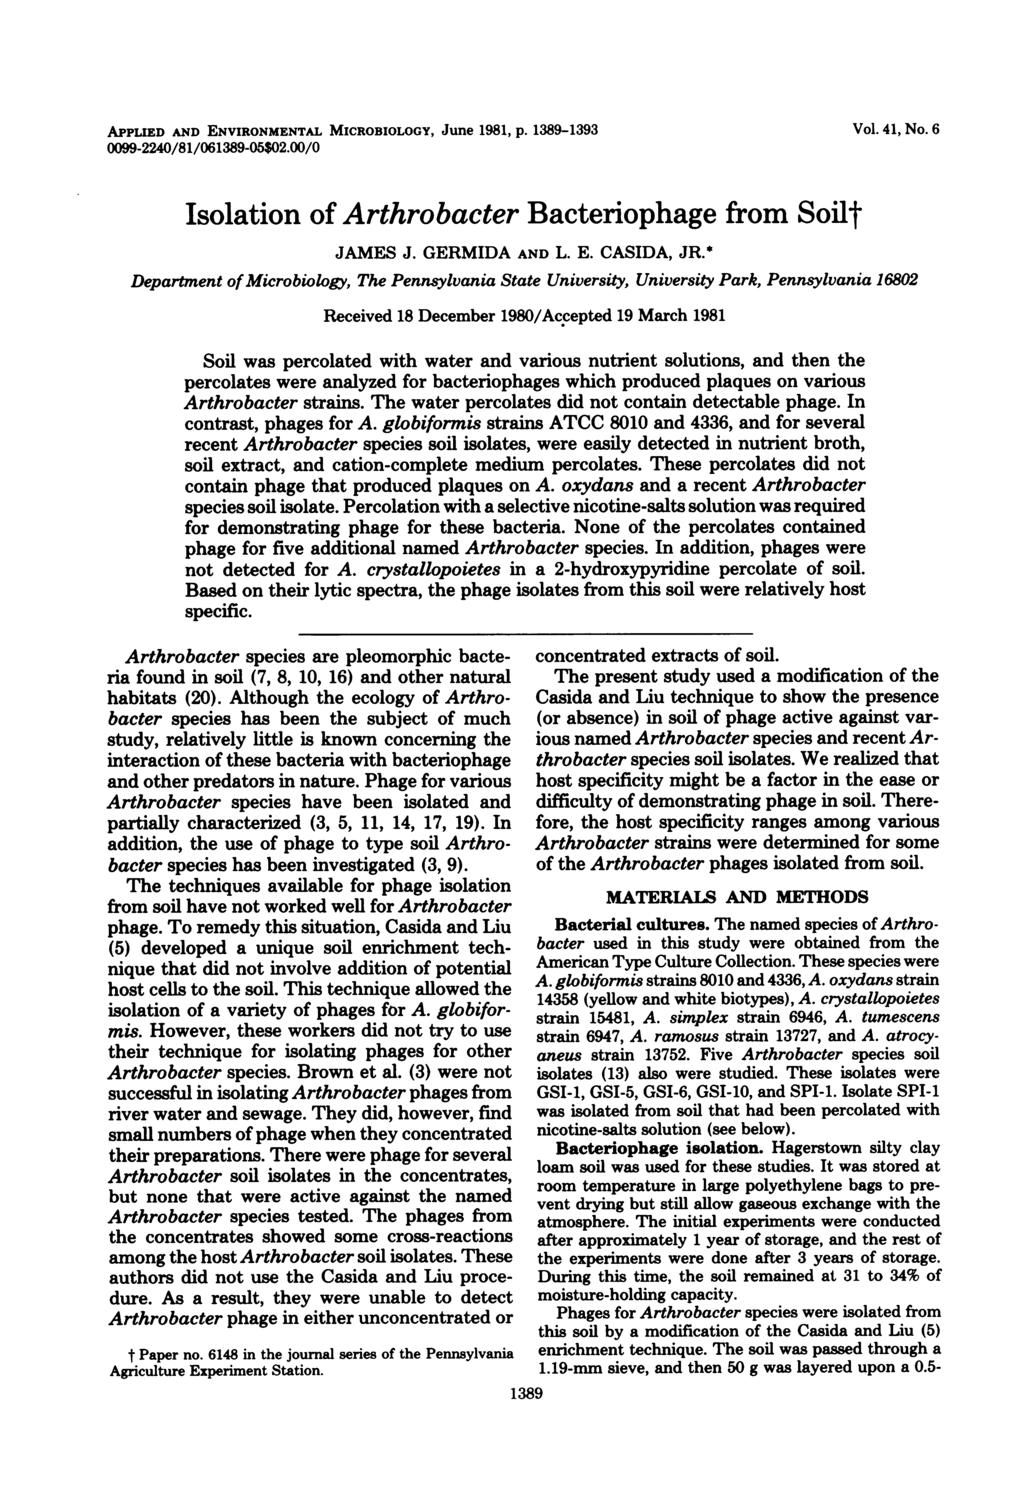 APPLIED AND ENVIRONMENTAL MICROBIOLOGY, June 1981, p. 1389-1393 0099-2240/81/061389-05$02.00/0 Vol. 41, No. 6 Isolation of Arthrobacter Bacteriophage from Soilt JAMES J. GERMIDA AND L. E. CASIDA, JR.